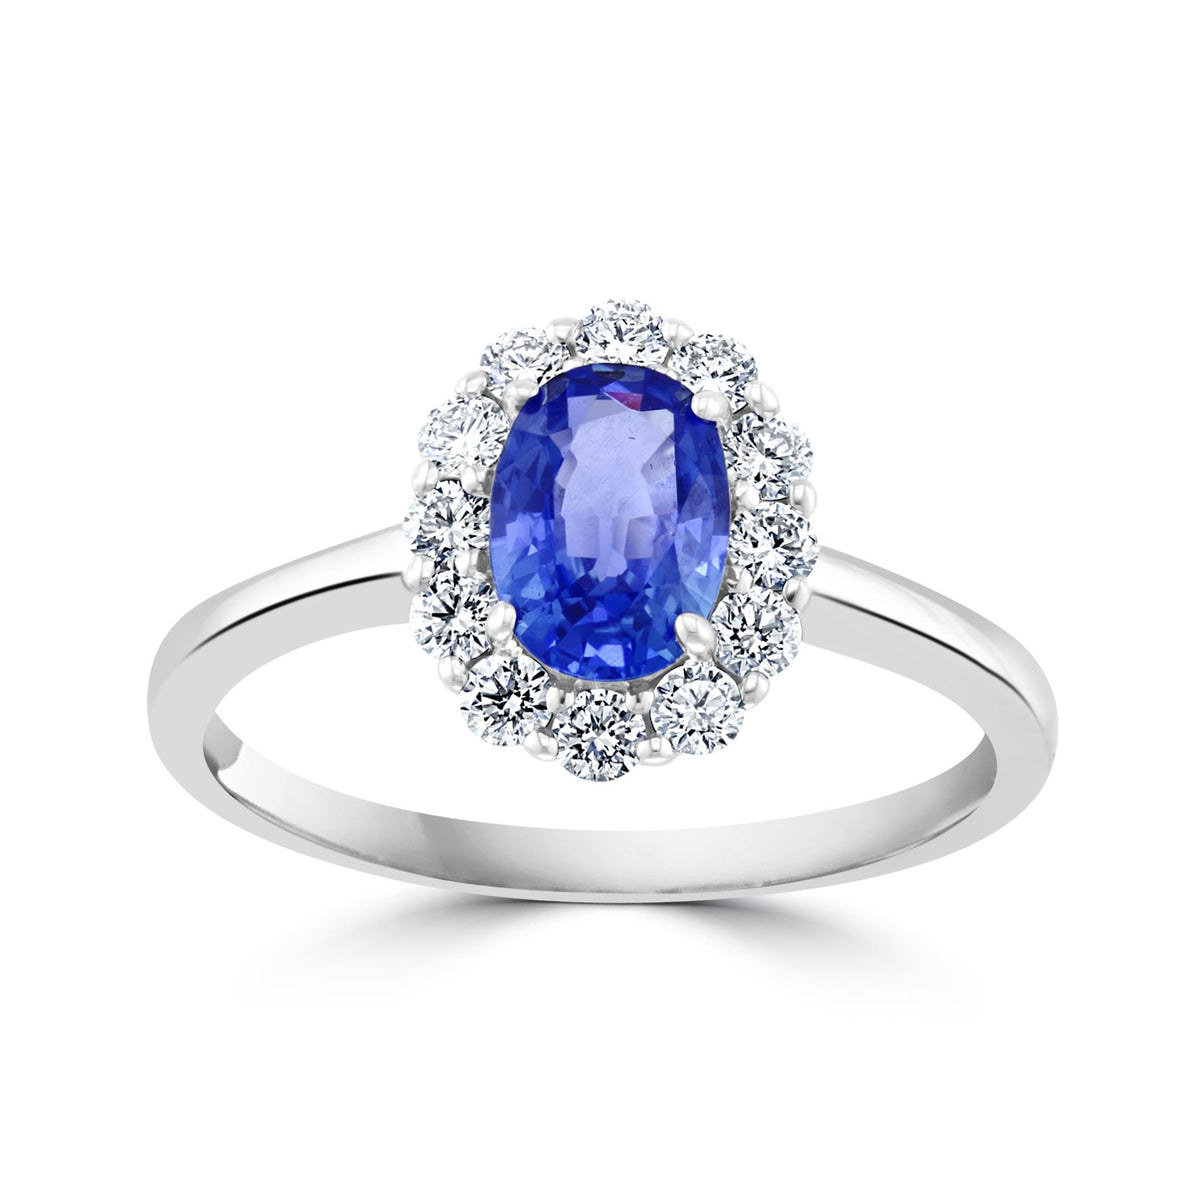 18Kt White Gold Halo Gemstone Ring With 0.96ct Sapphire